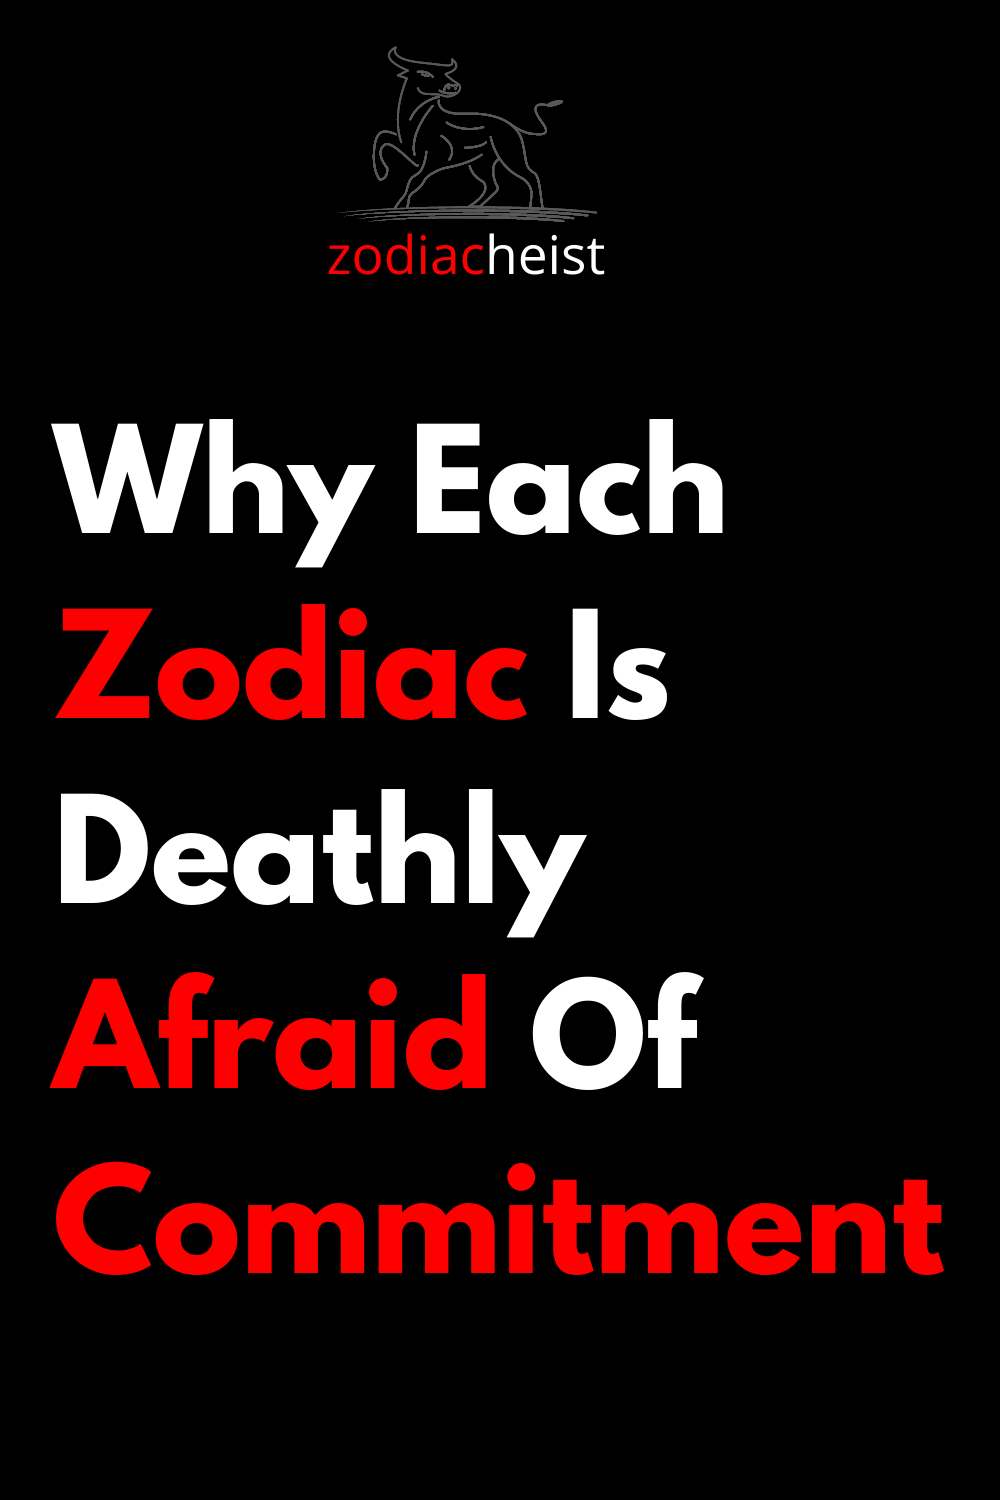 Why Each Zodiac Is Deathly Afraid Of Commitment